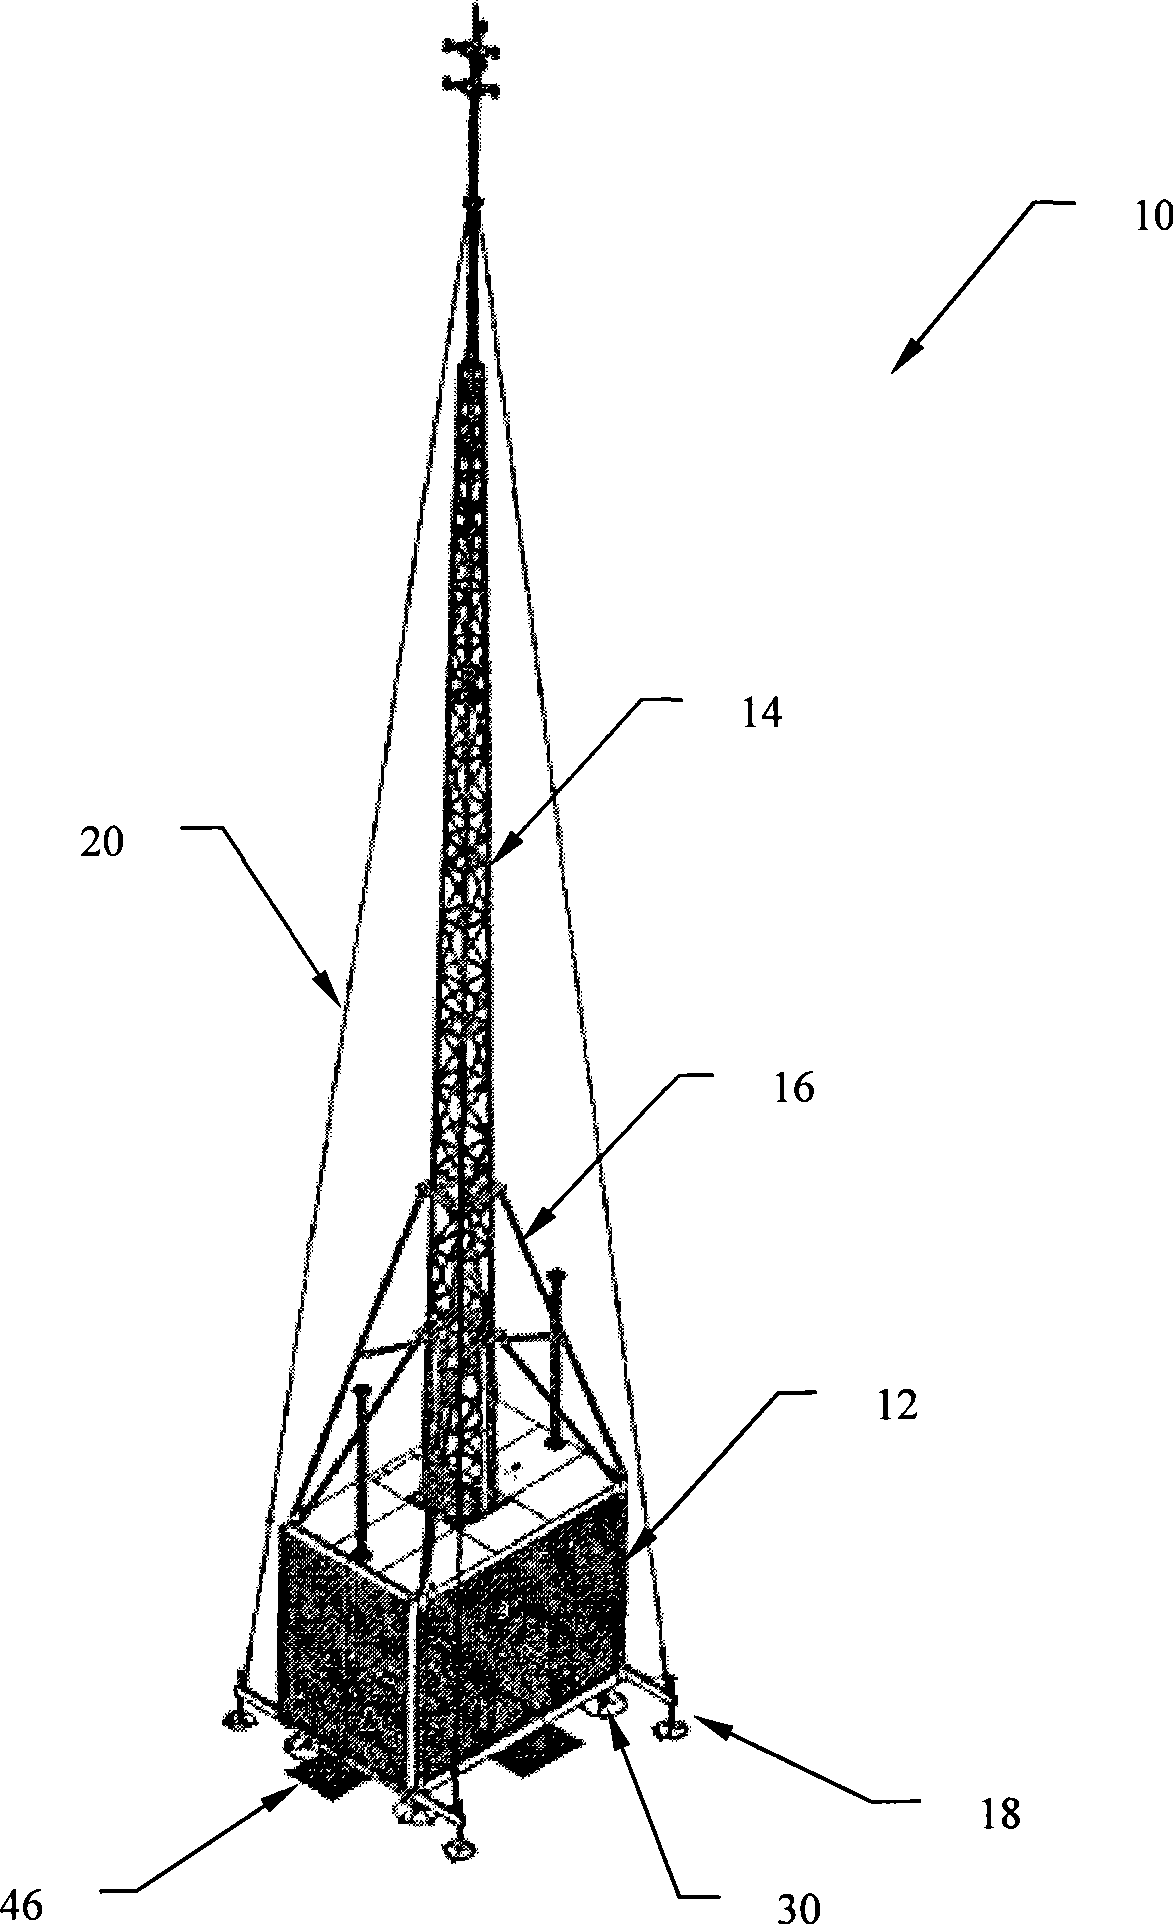 A portable mobile communication tower